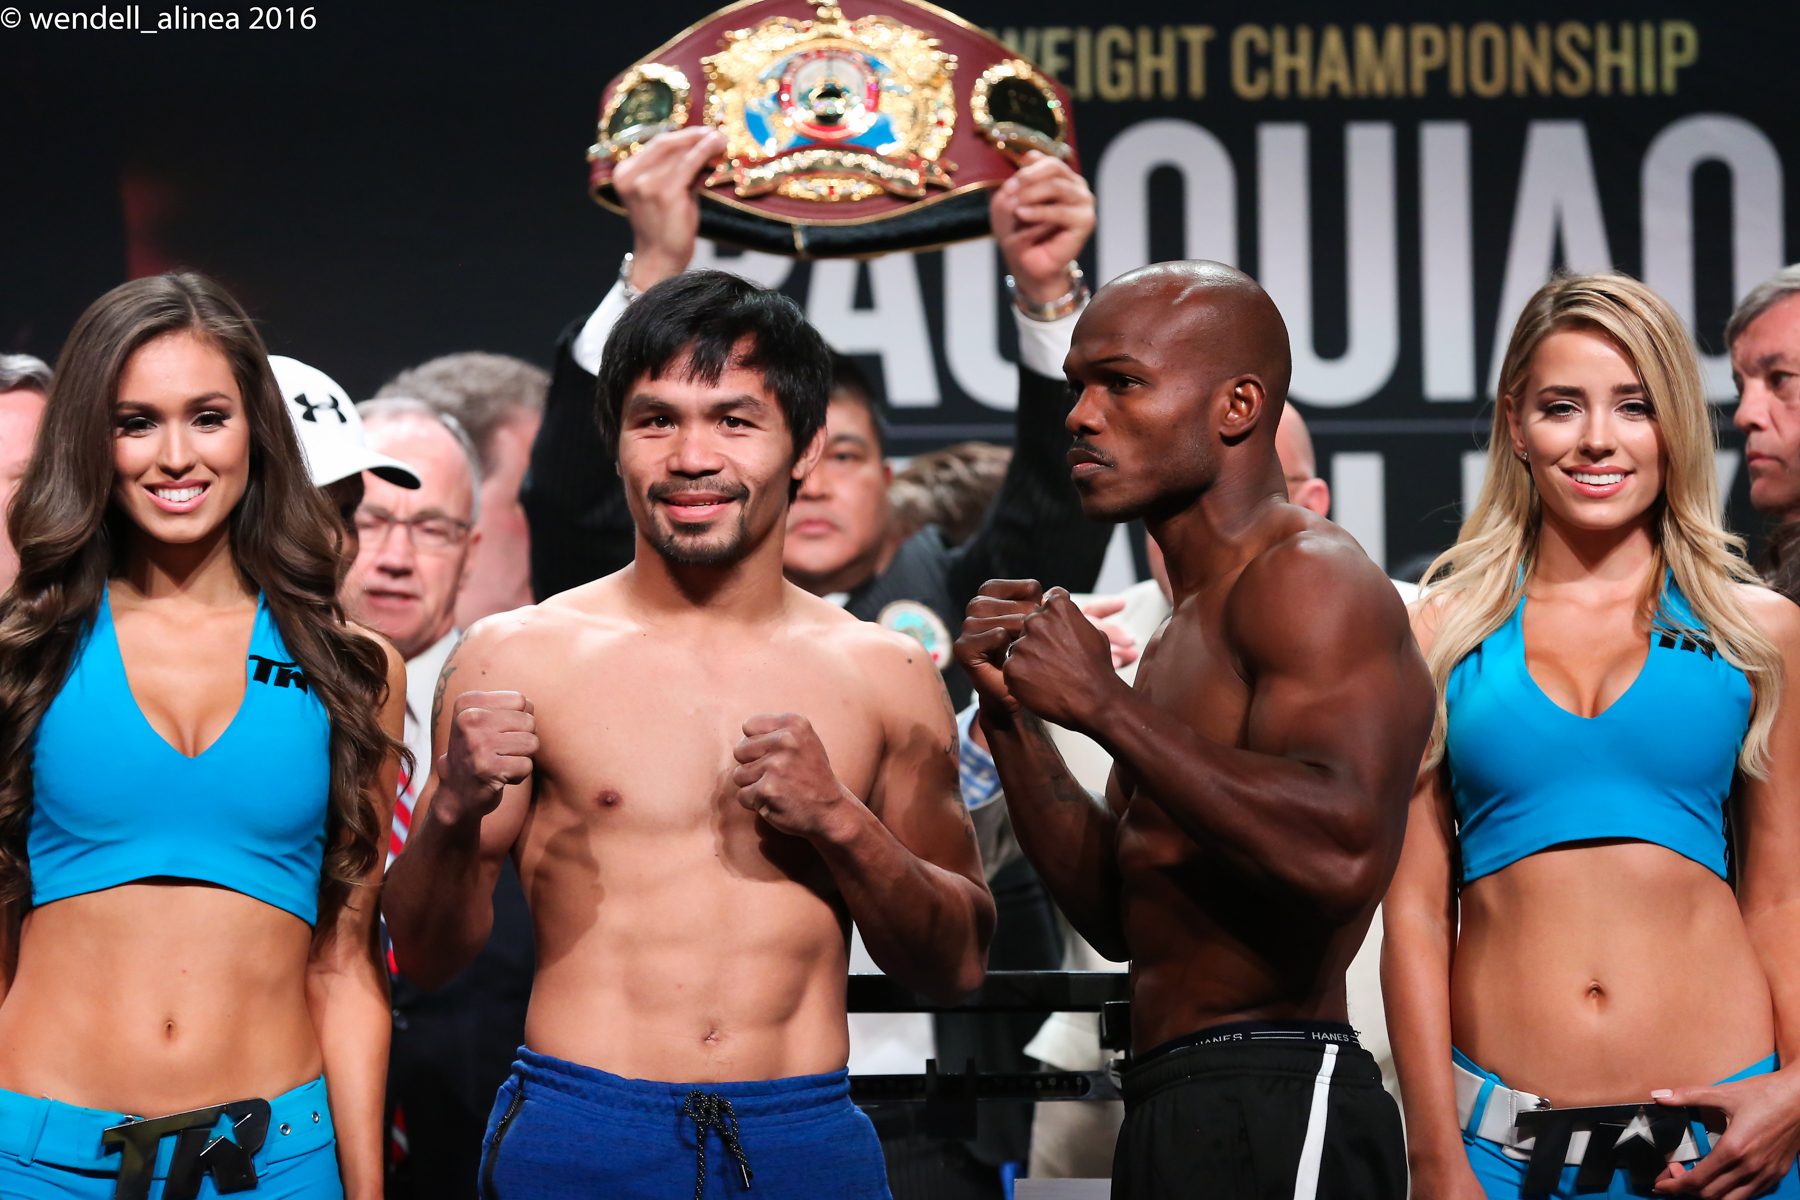 IN PHOTOS: Pacquiao and Bradley on the scale